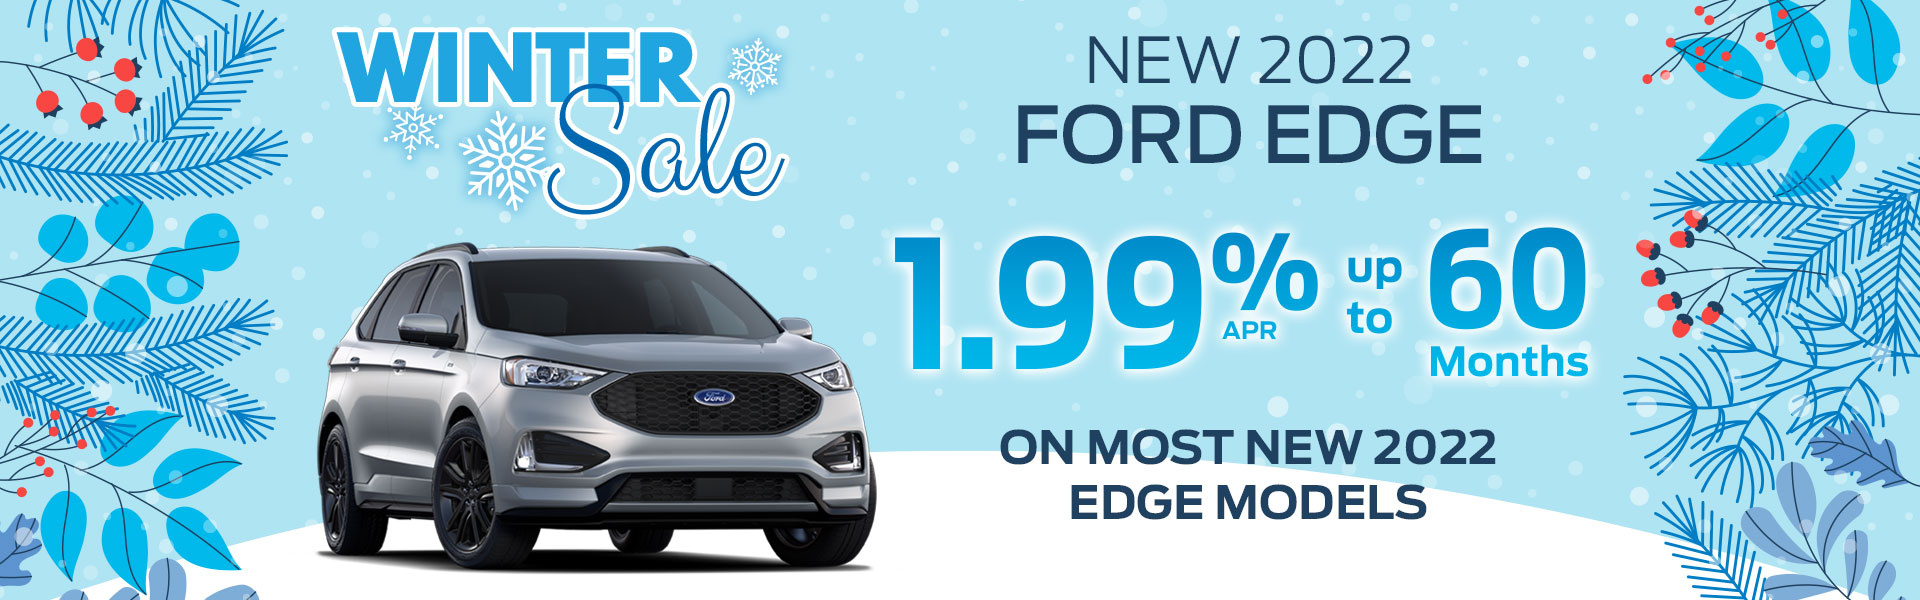 2022 Ford Edge Winter Sales Event